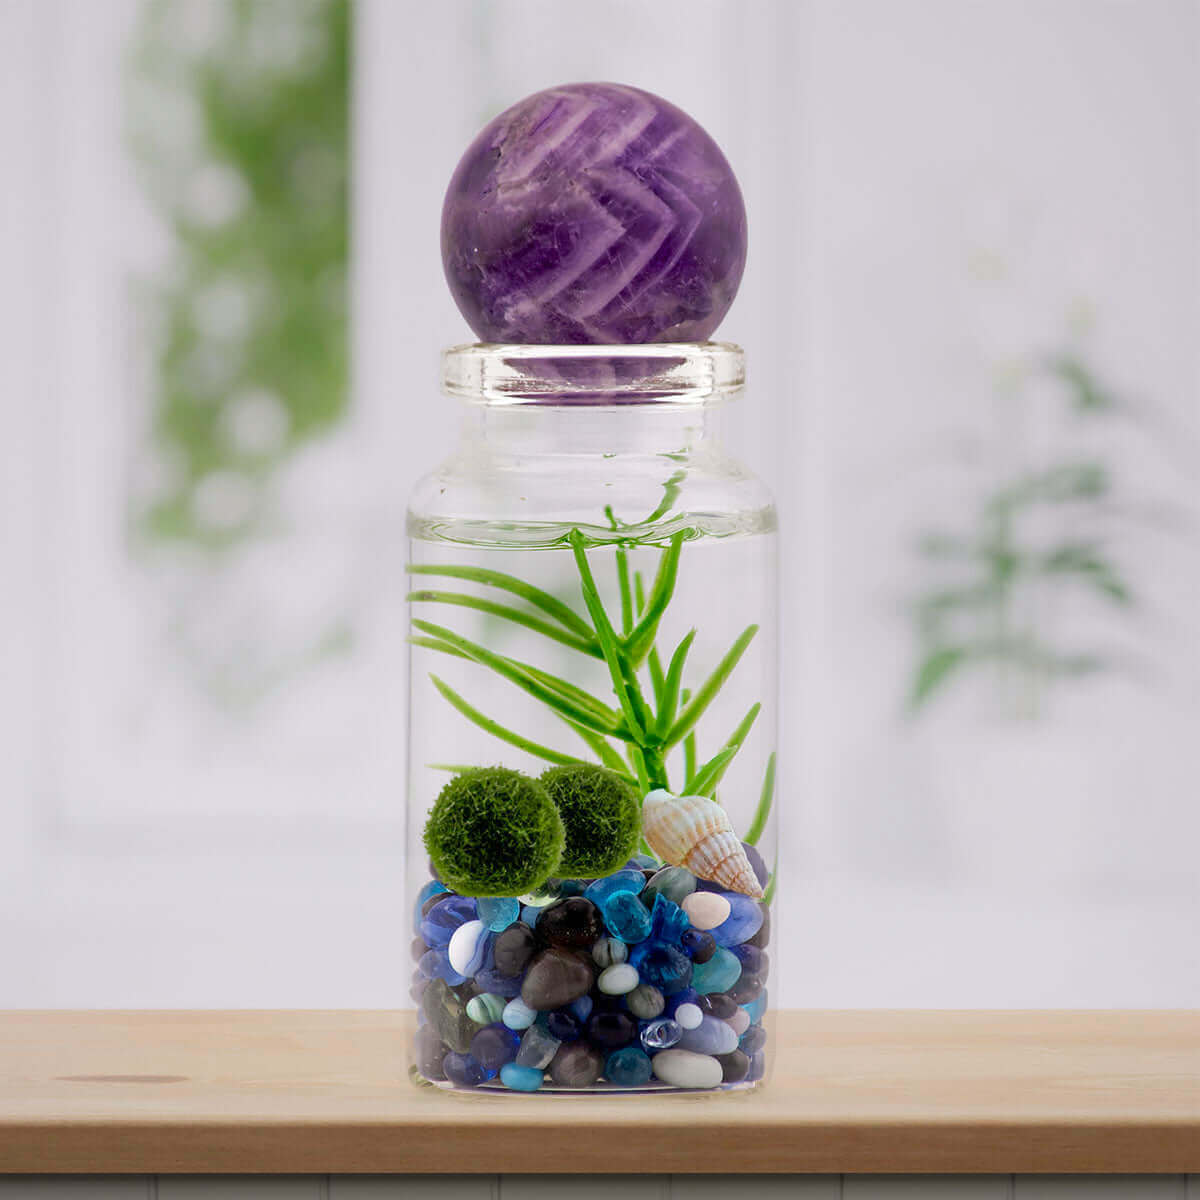 Amethyst sphere atop a terrarium, a purple gemstone known for tranquility.